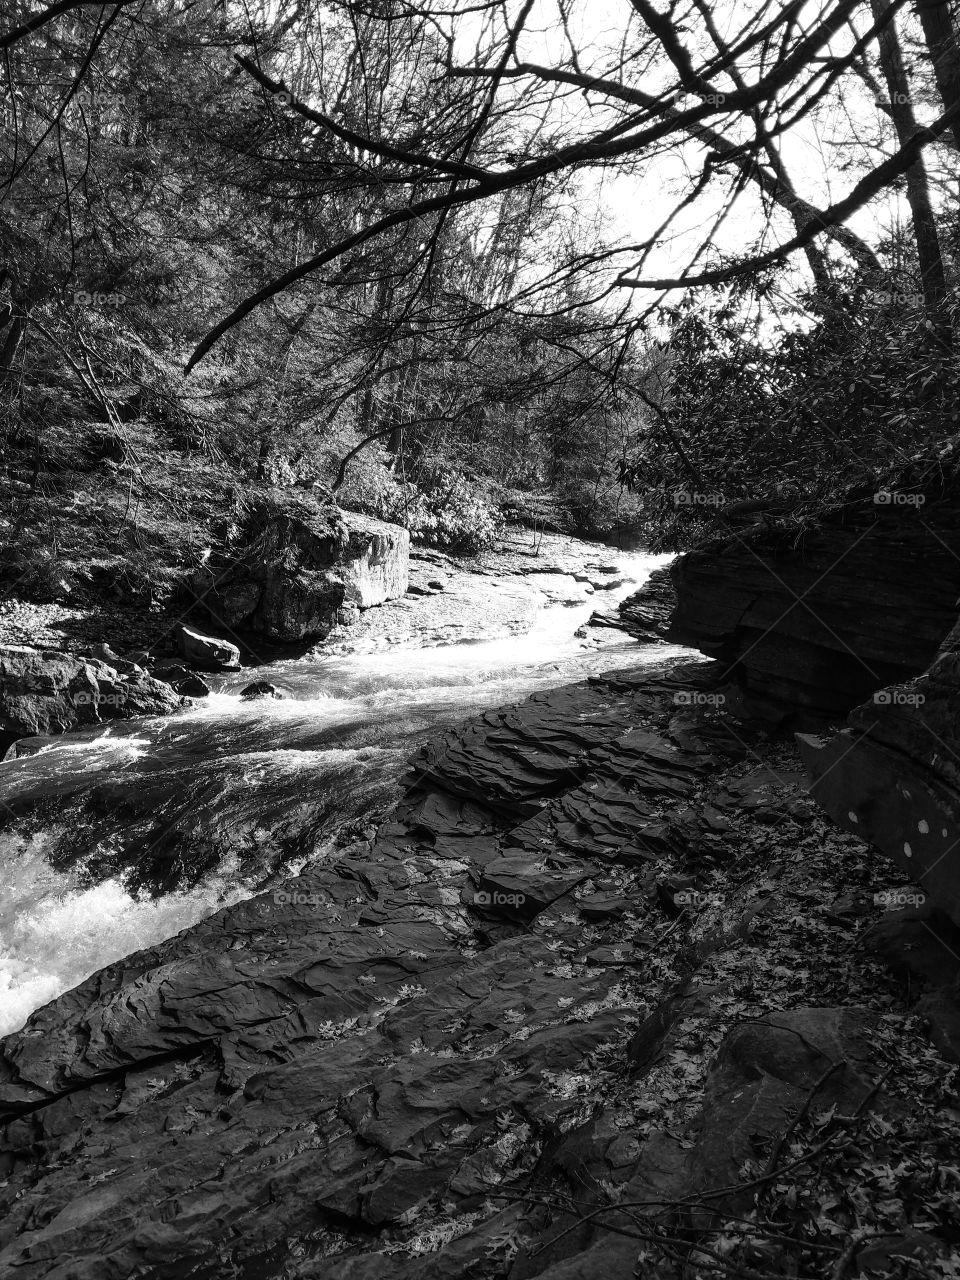 Ohiopyle PA natural waterslide Essential PH-1 Monochrome Sensor edited with Photoshop Express